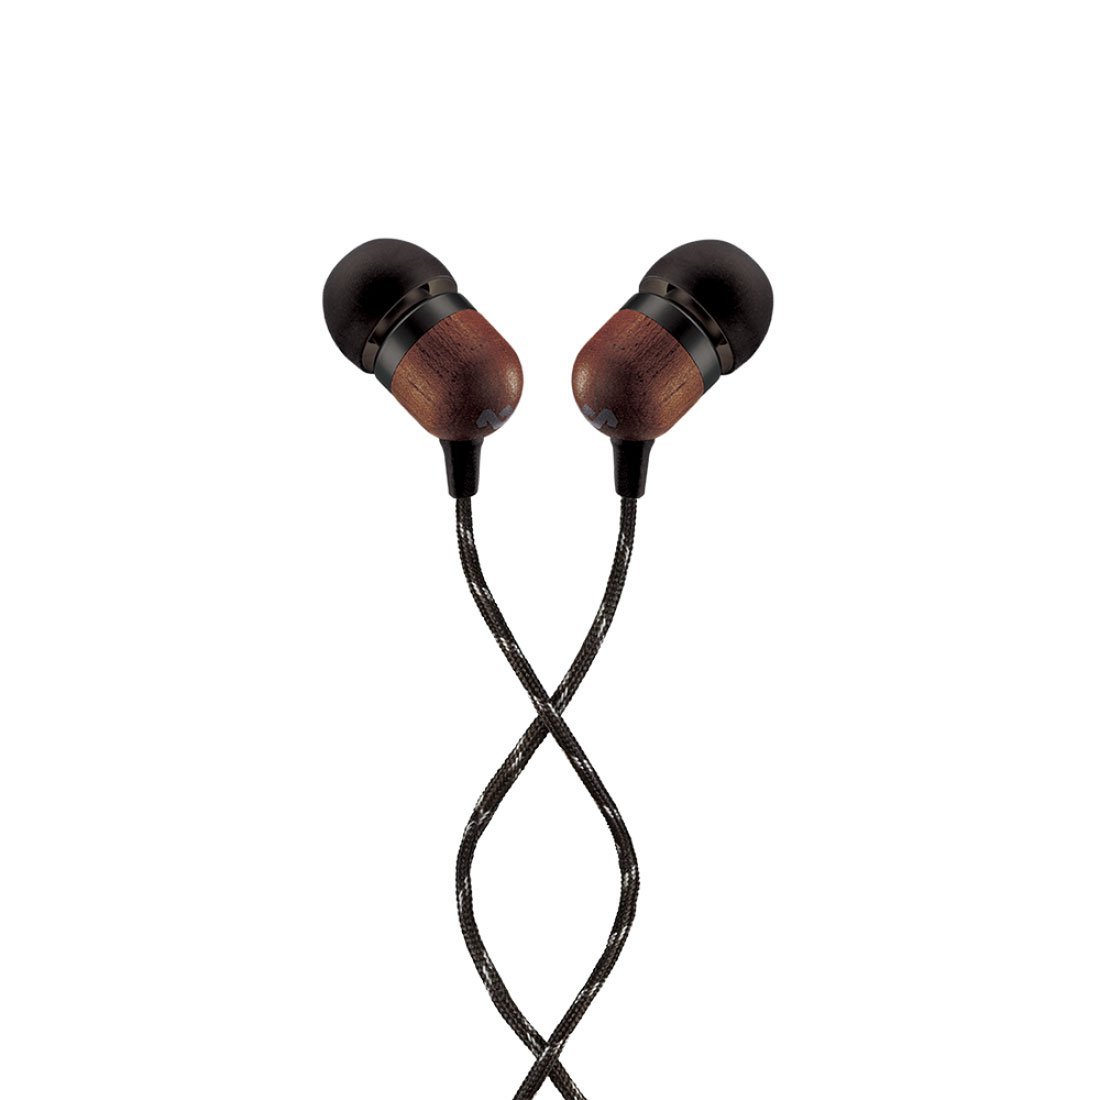 The House of Marley, LLC. EM-JE041-SB House of Marley Smile Jamaica Earbuds Headphones headset with mic Hands Free